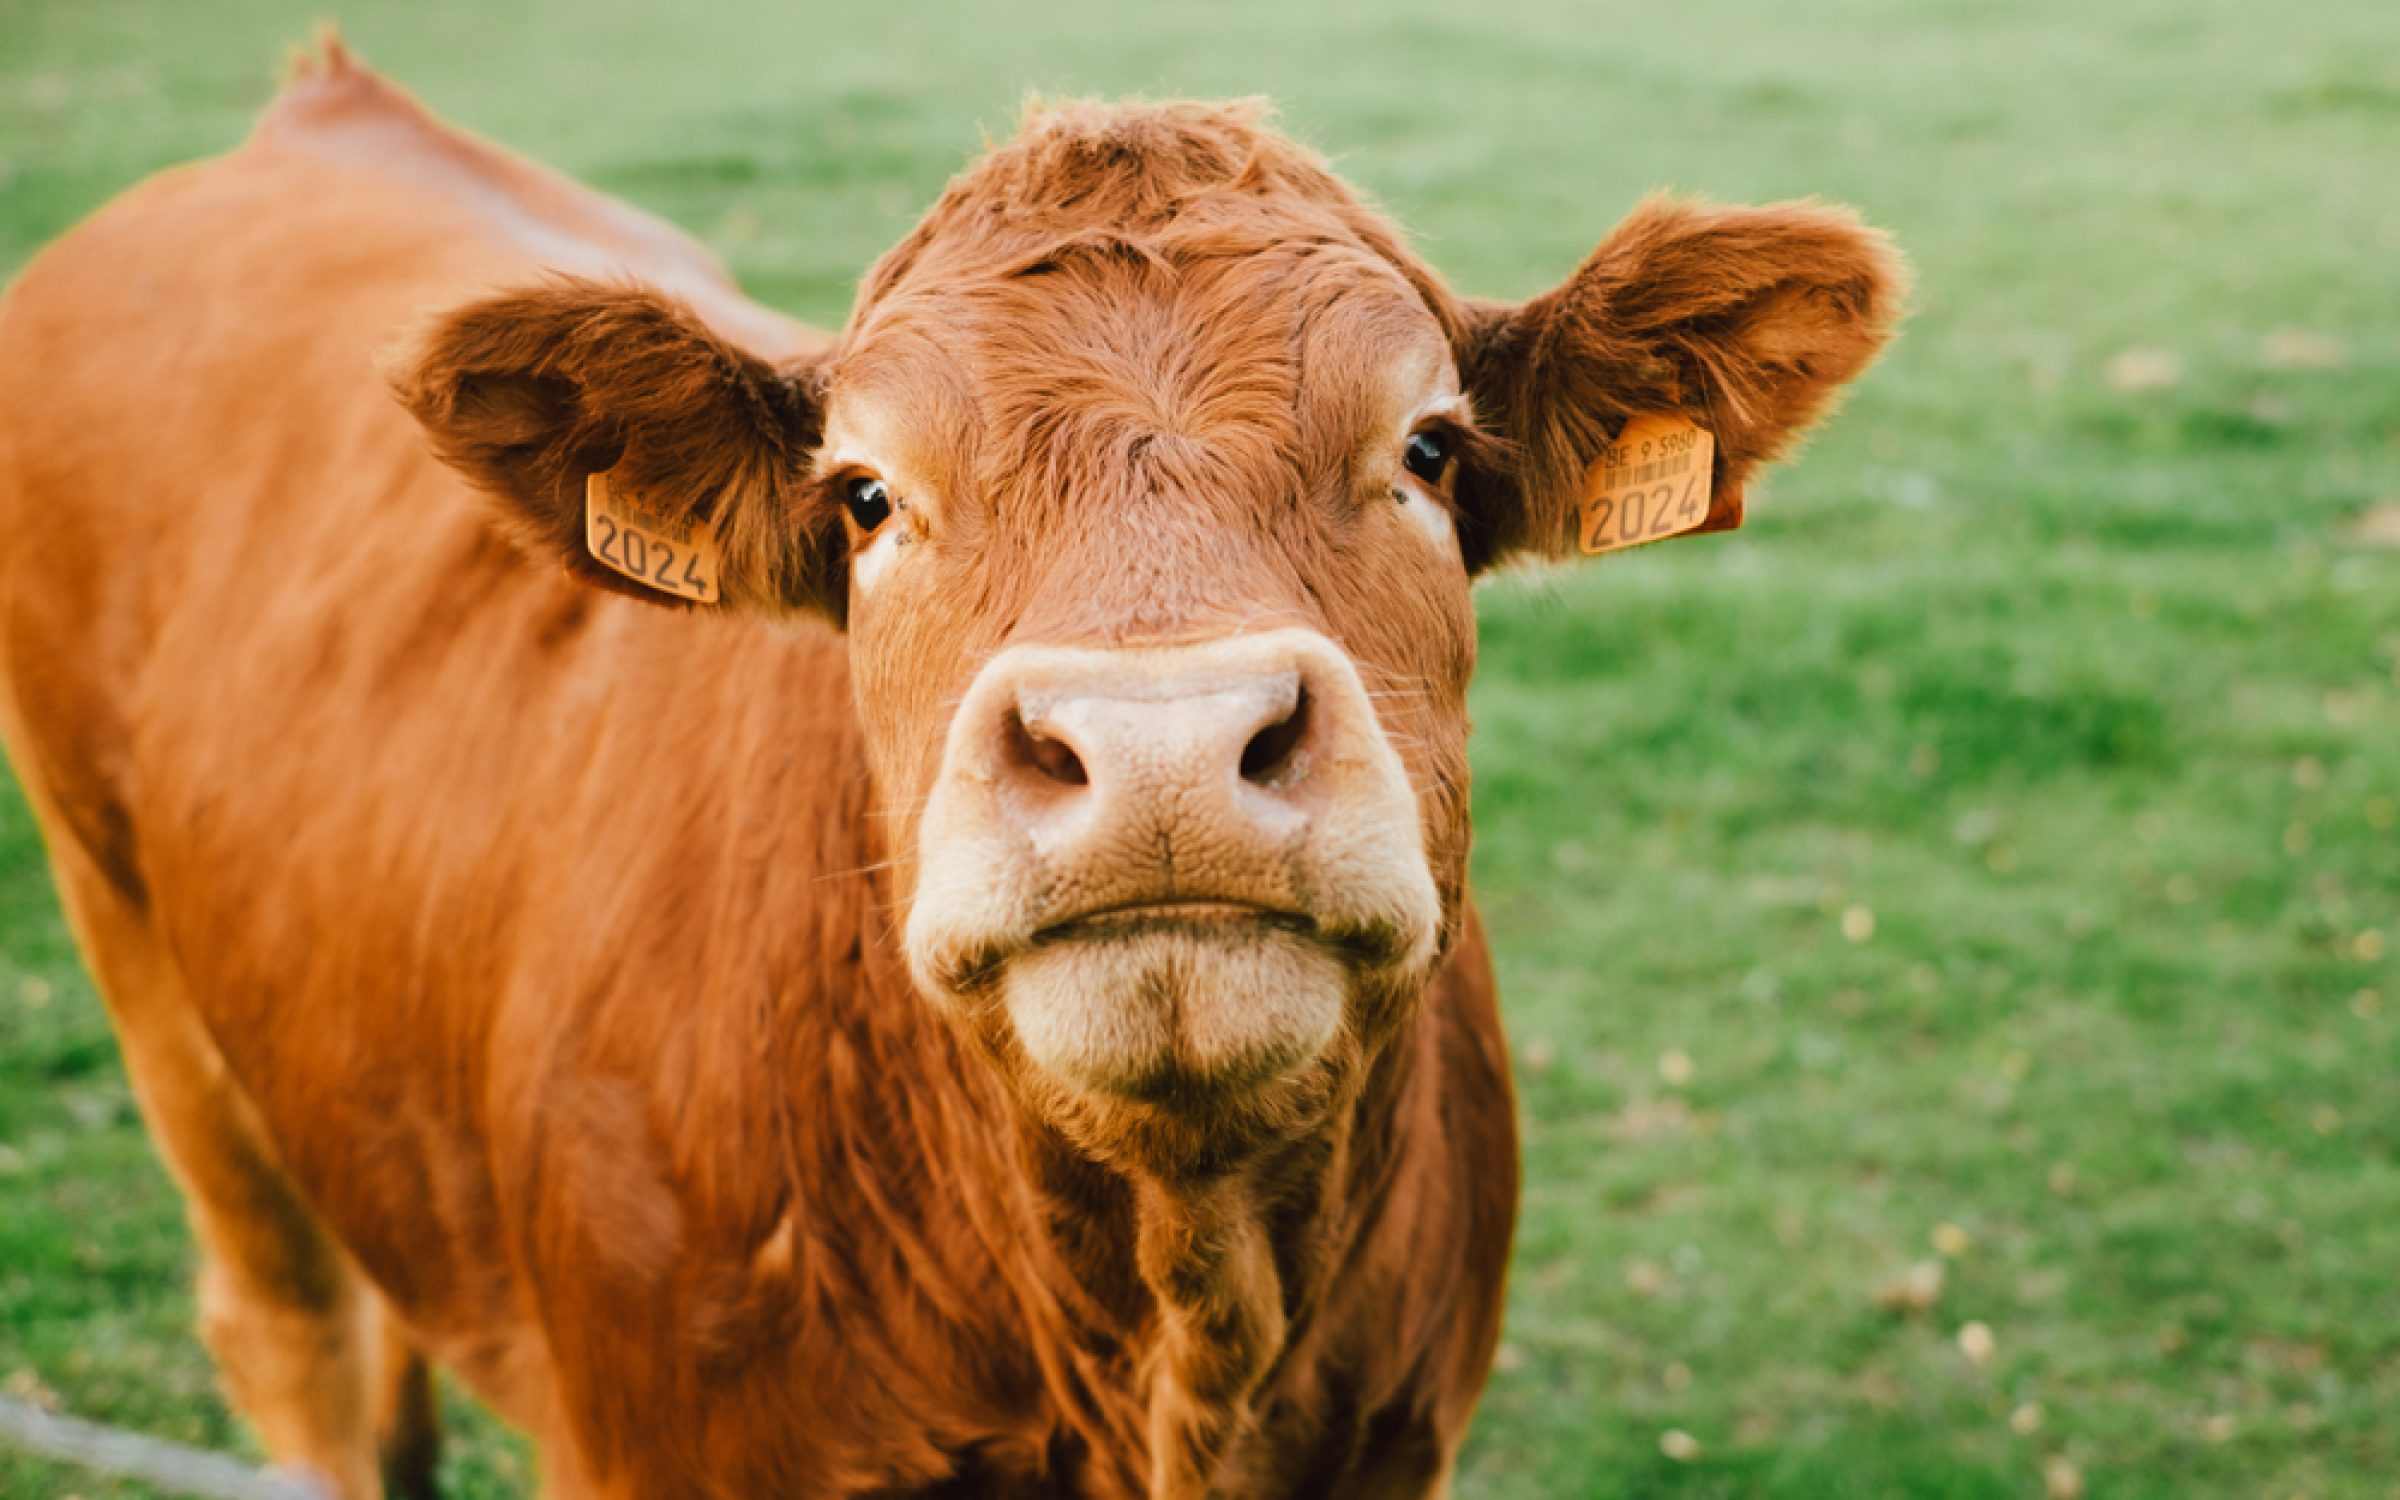 Northern Irish Limousin cow looking at the camera in a field